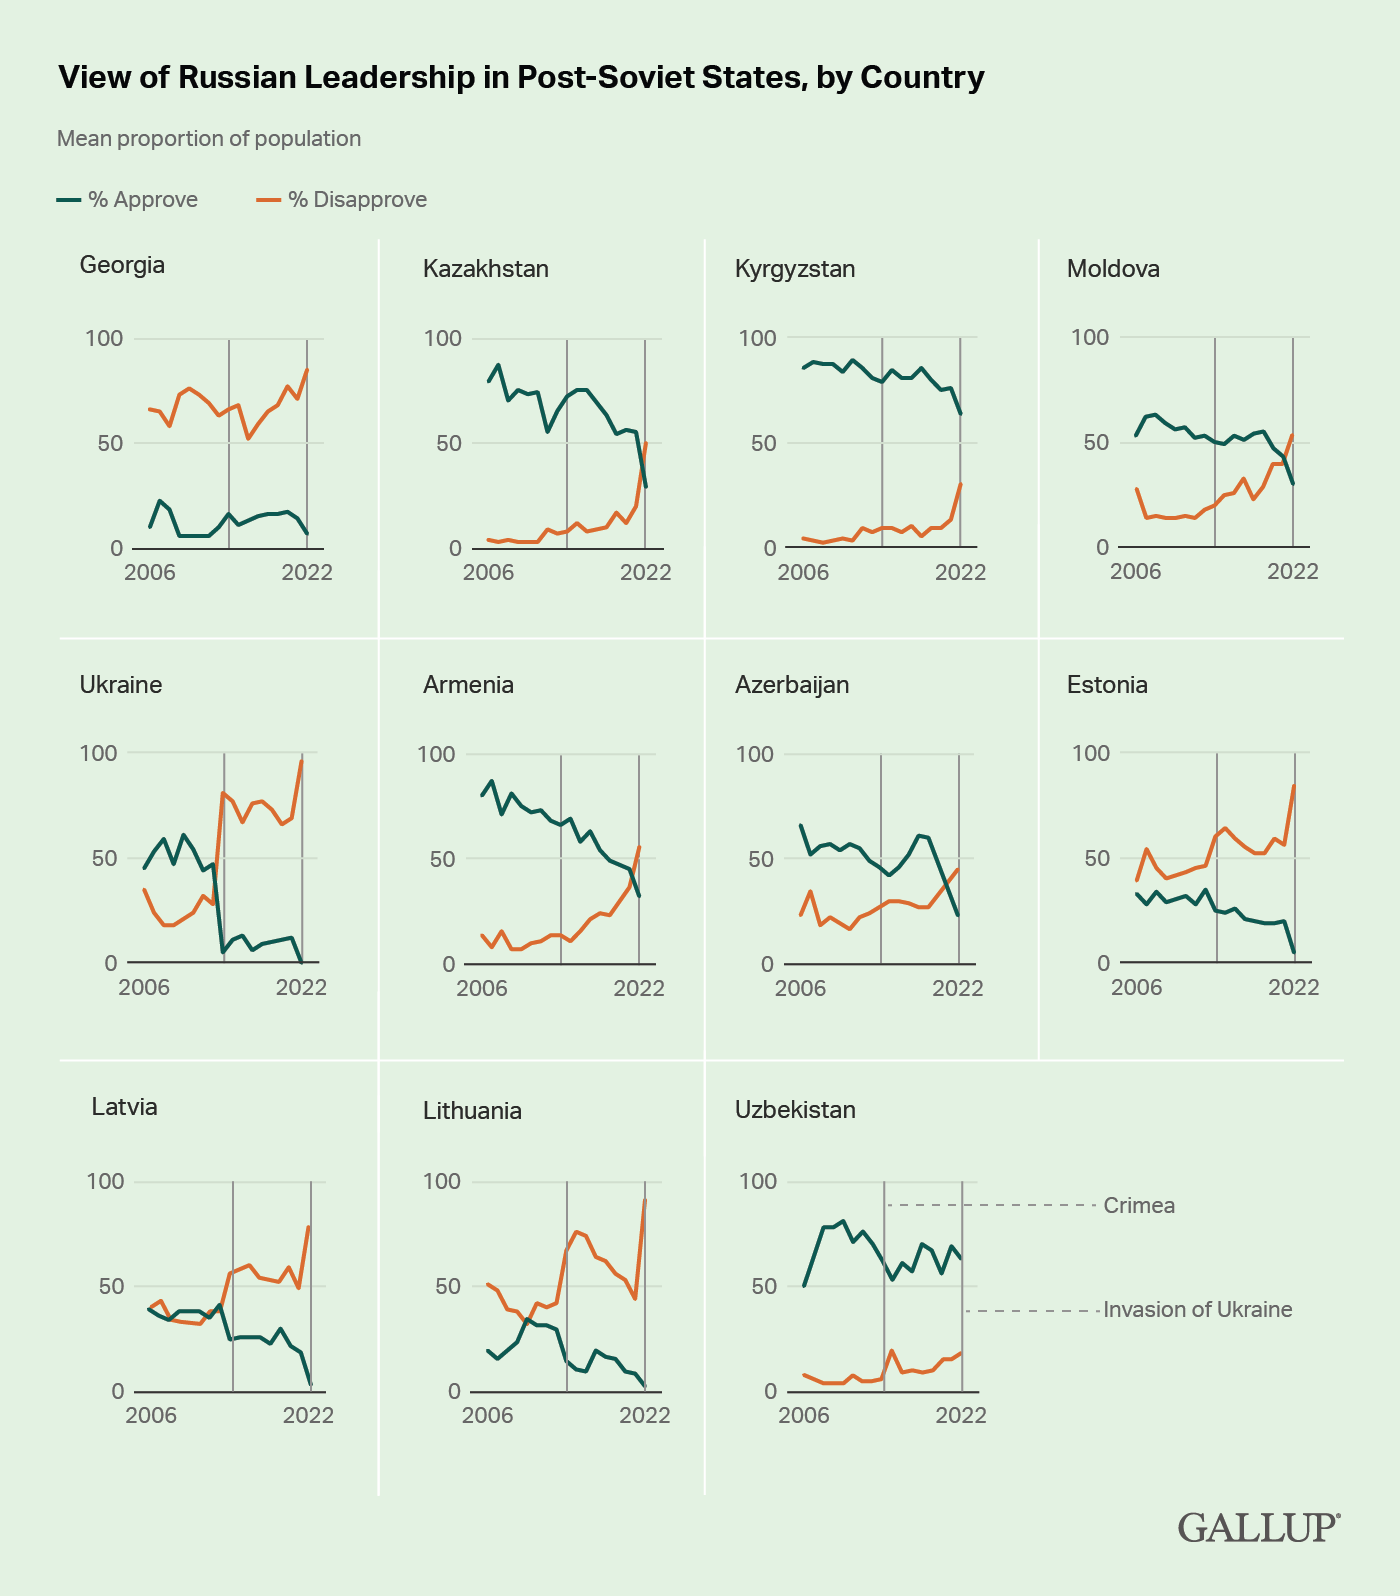 Line chart showing post-Soviet countries and their approval rating of Russian leadership. In each one of those countries, approval is going down and dissaproval is going up.